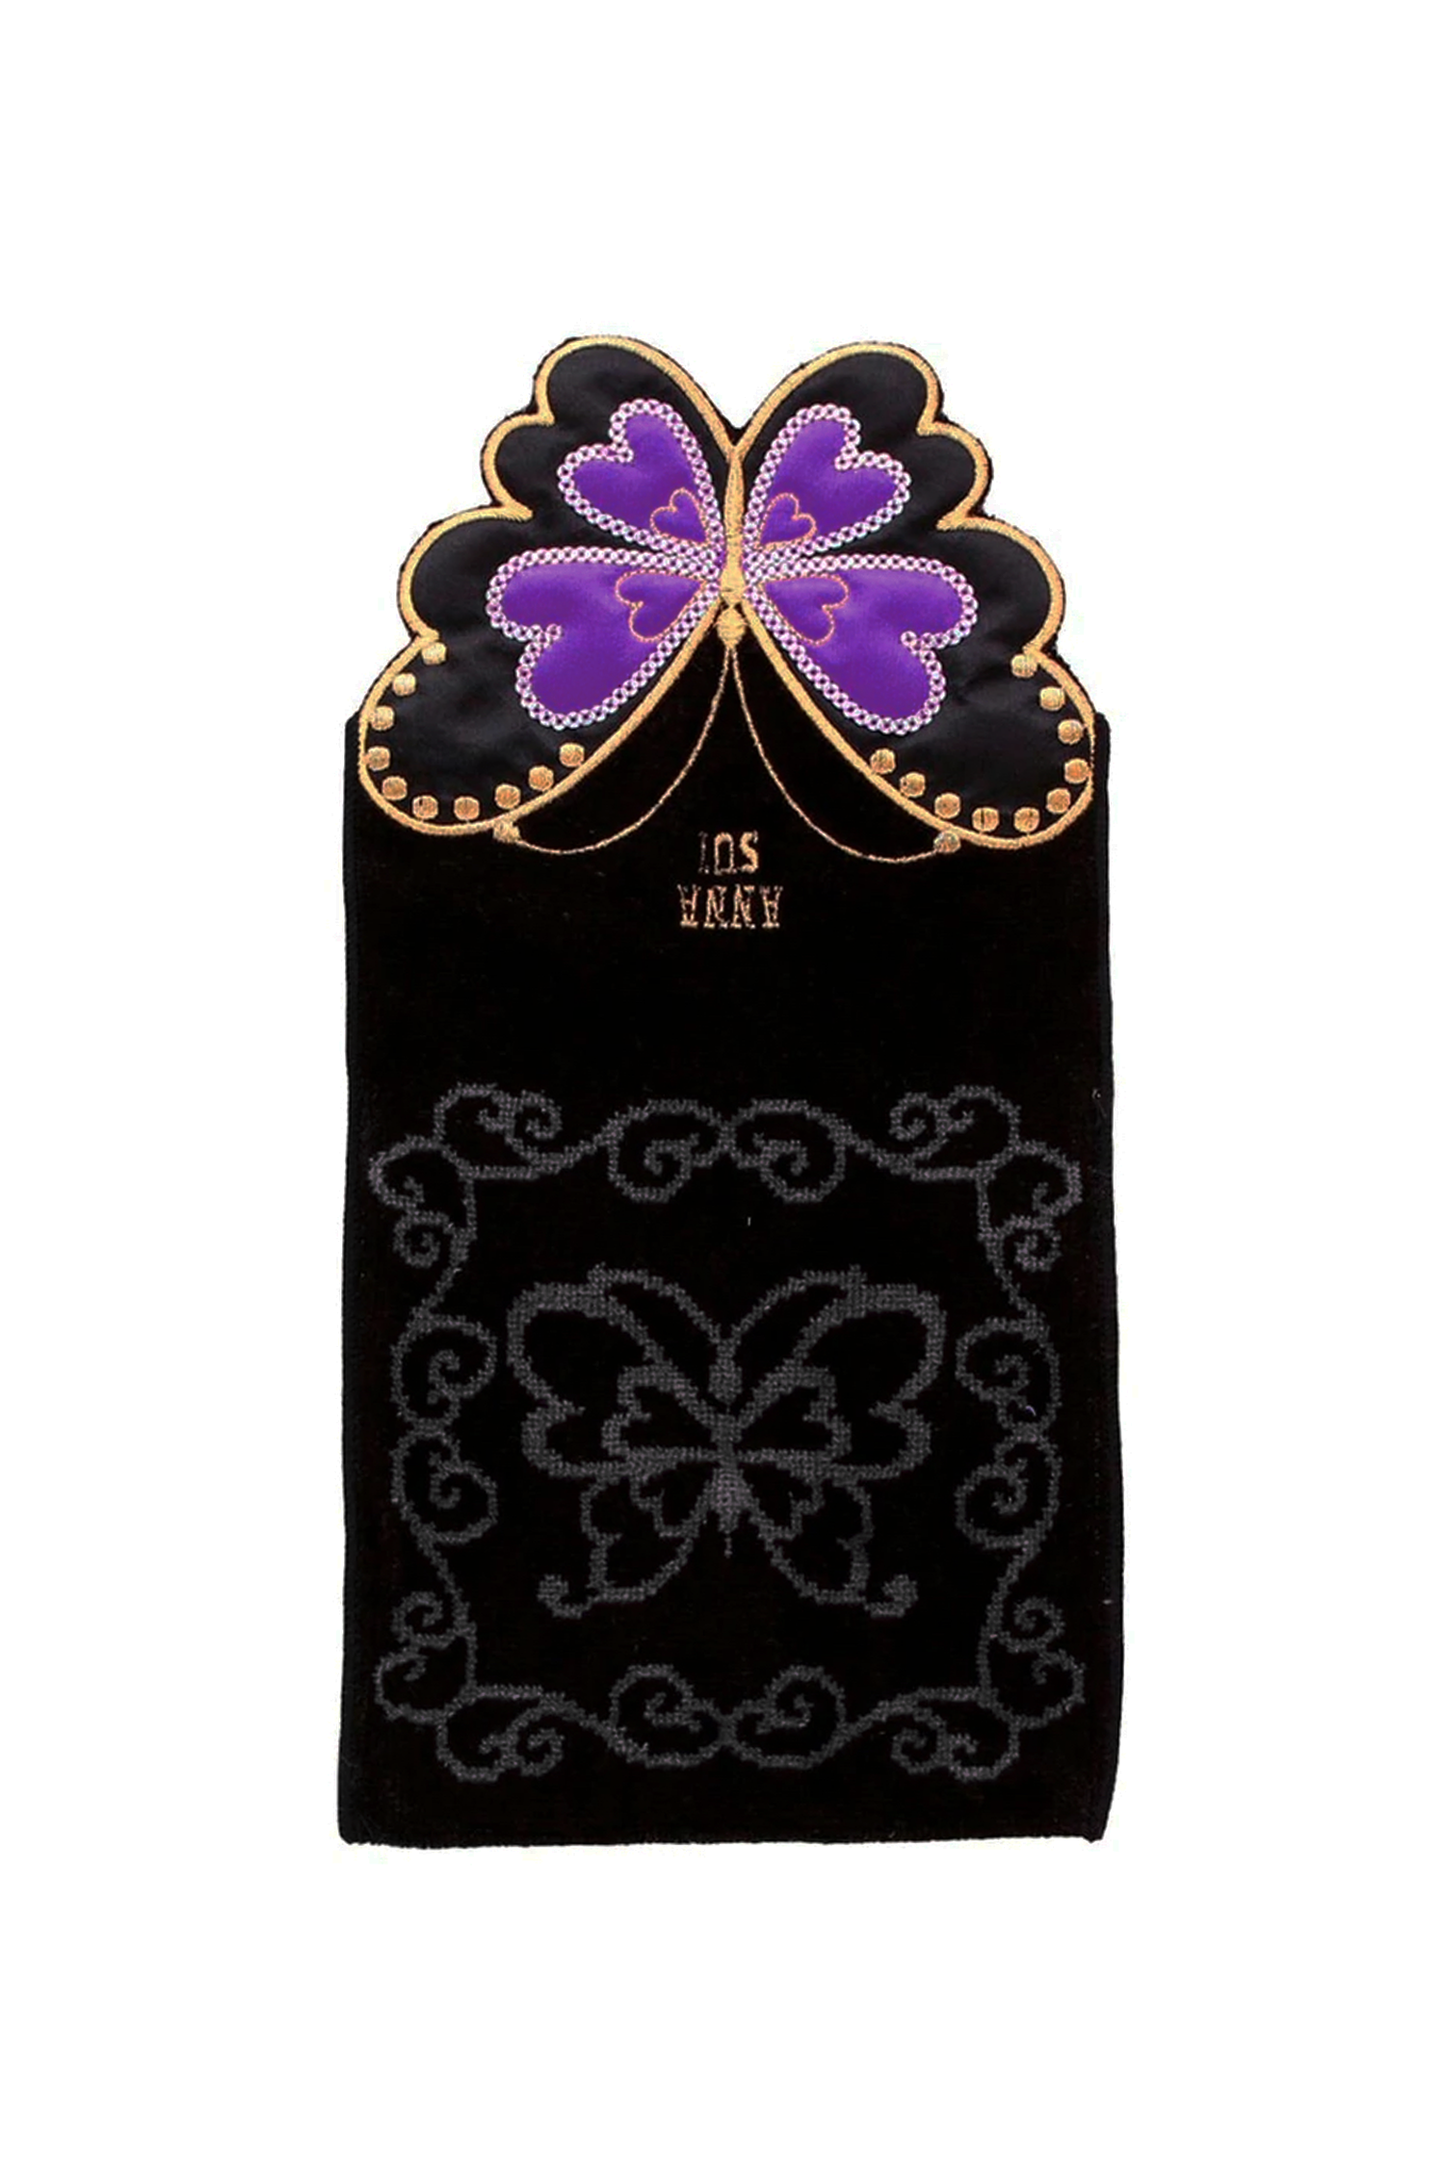 Open Black Pocket Washcloth, black/purple, golden border cut-out butterfly, Anna Sui gold label above